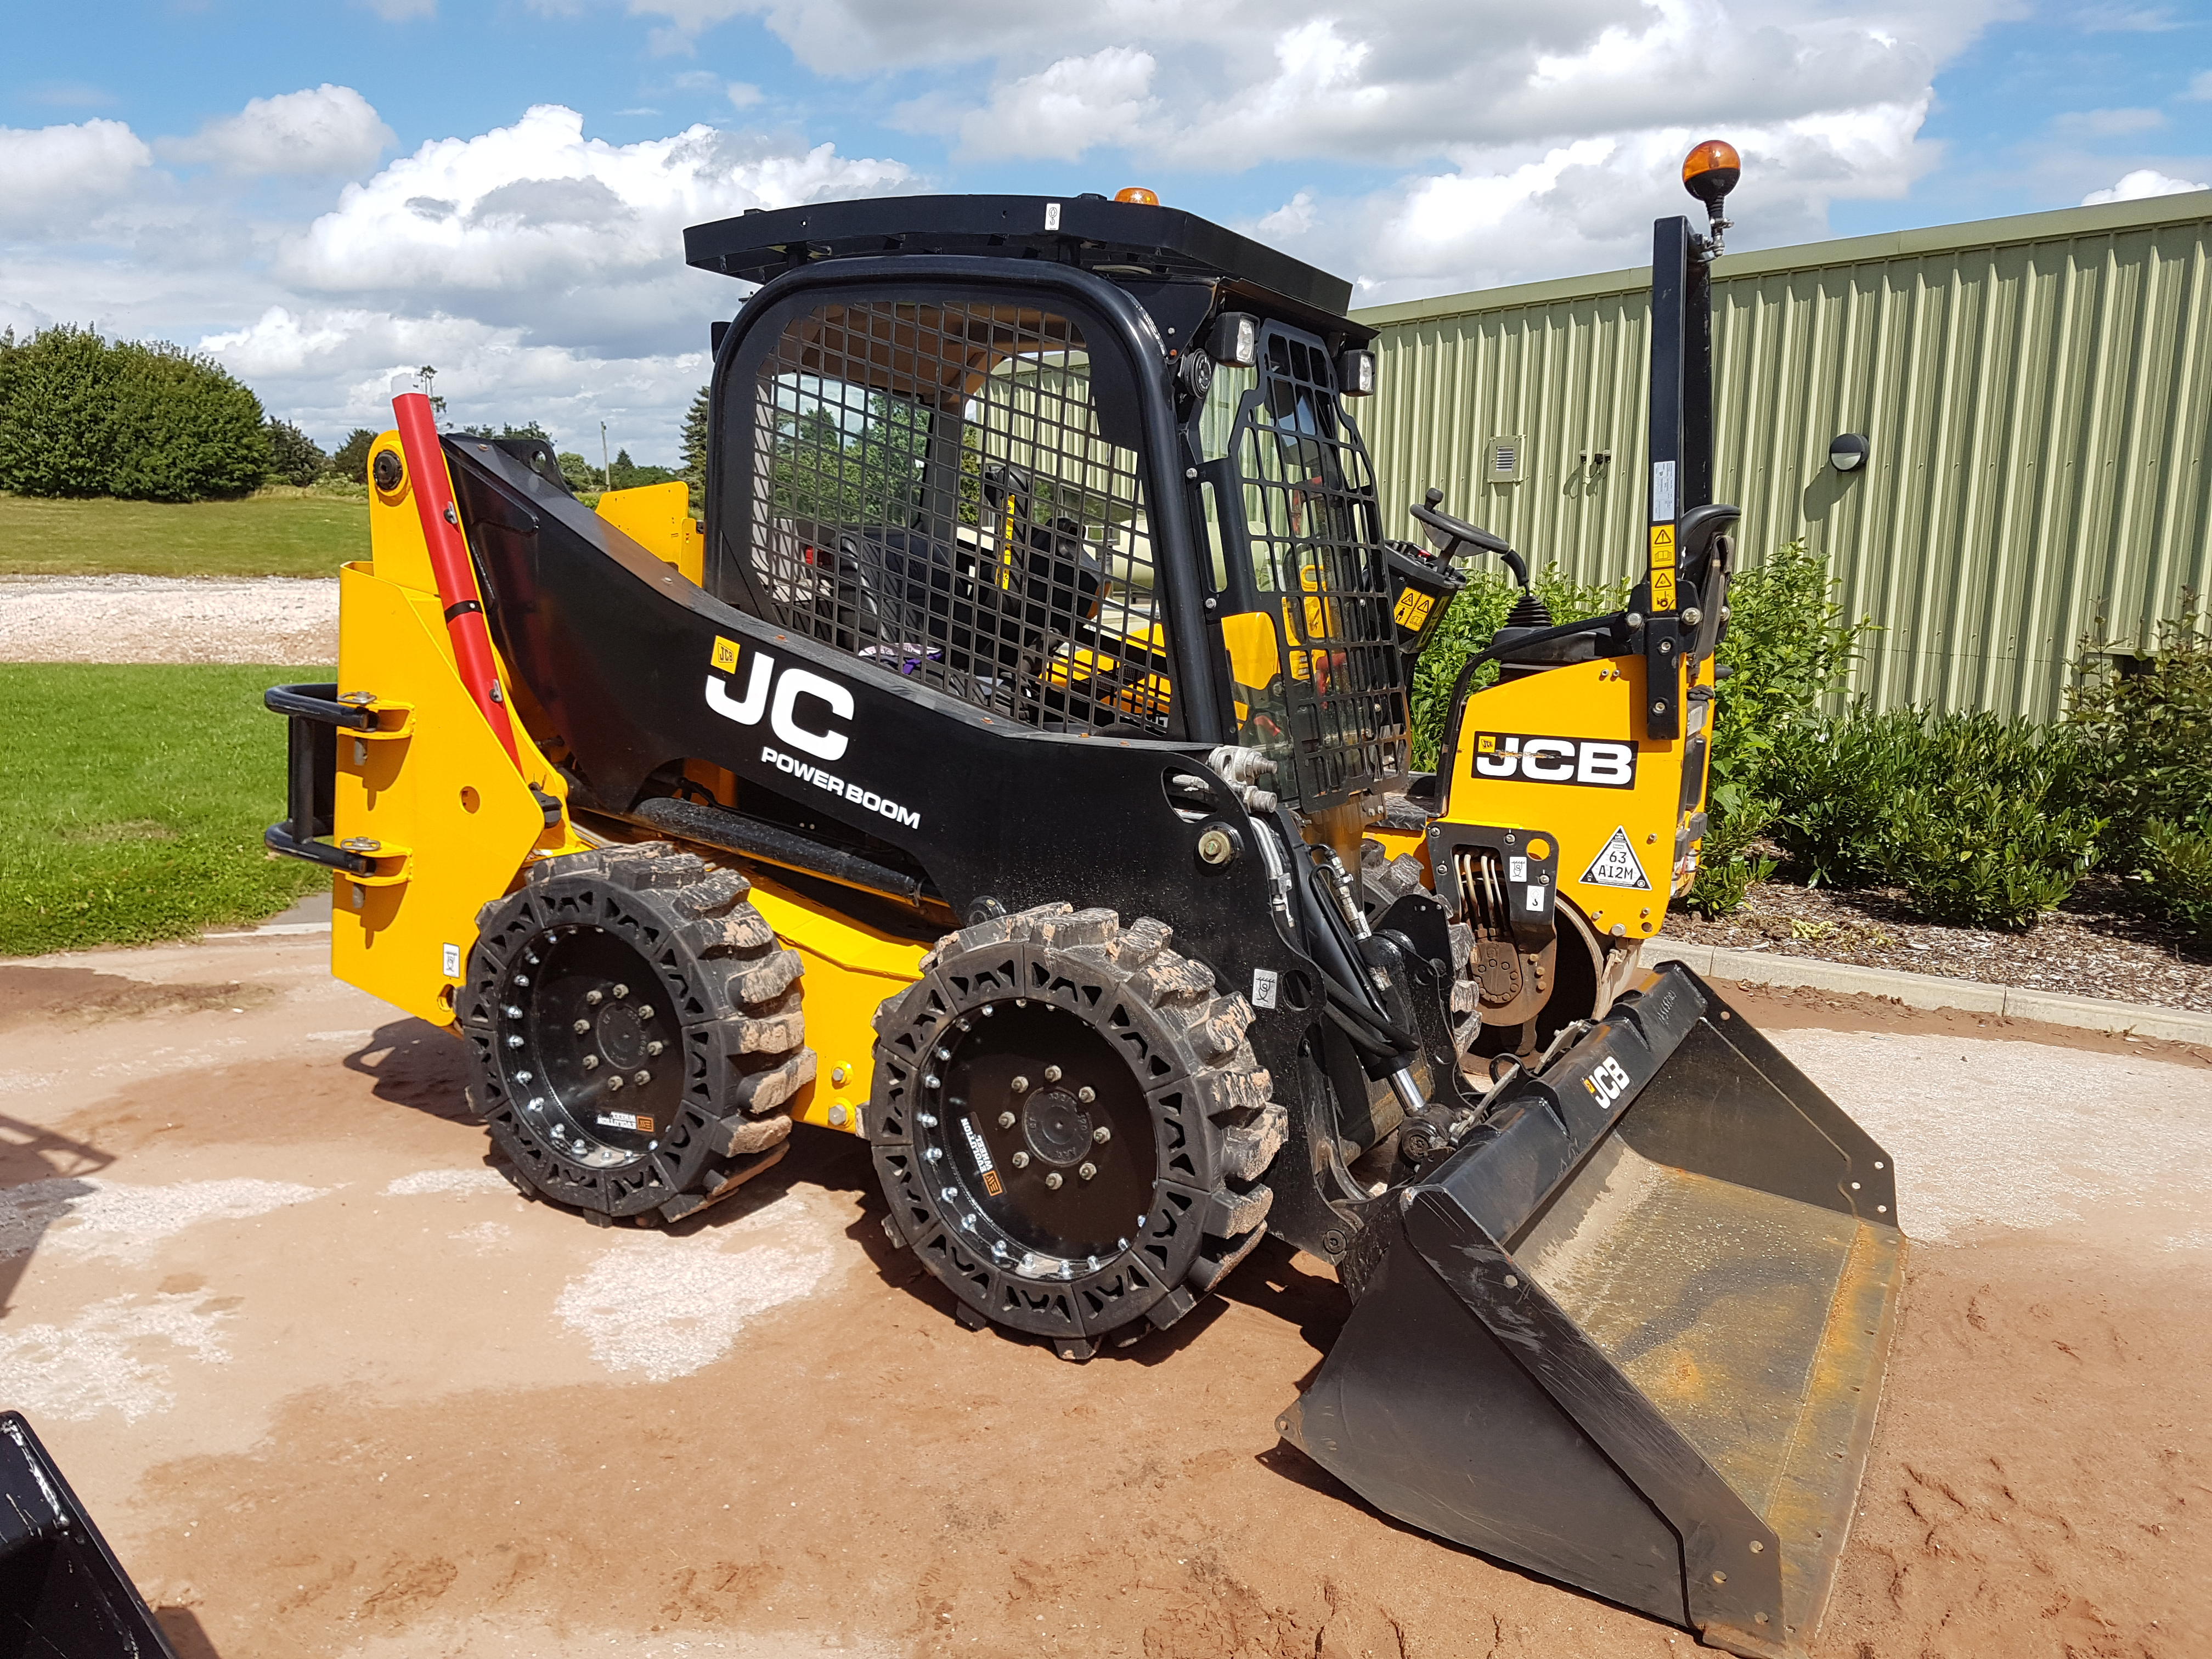 This images shows a yellow JCB Skid Steer using our 10x16 5 Bobcat tires